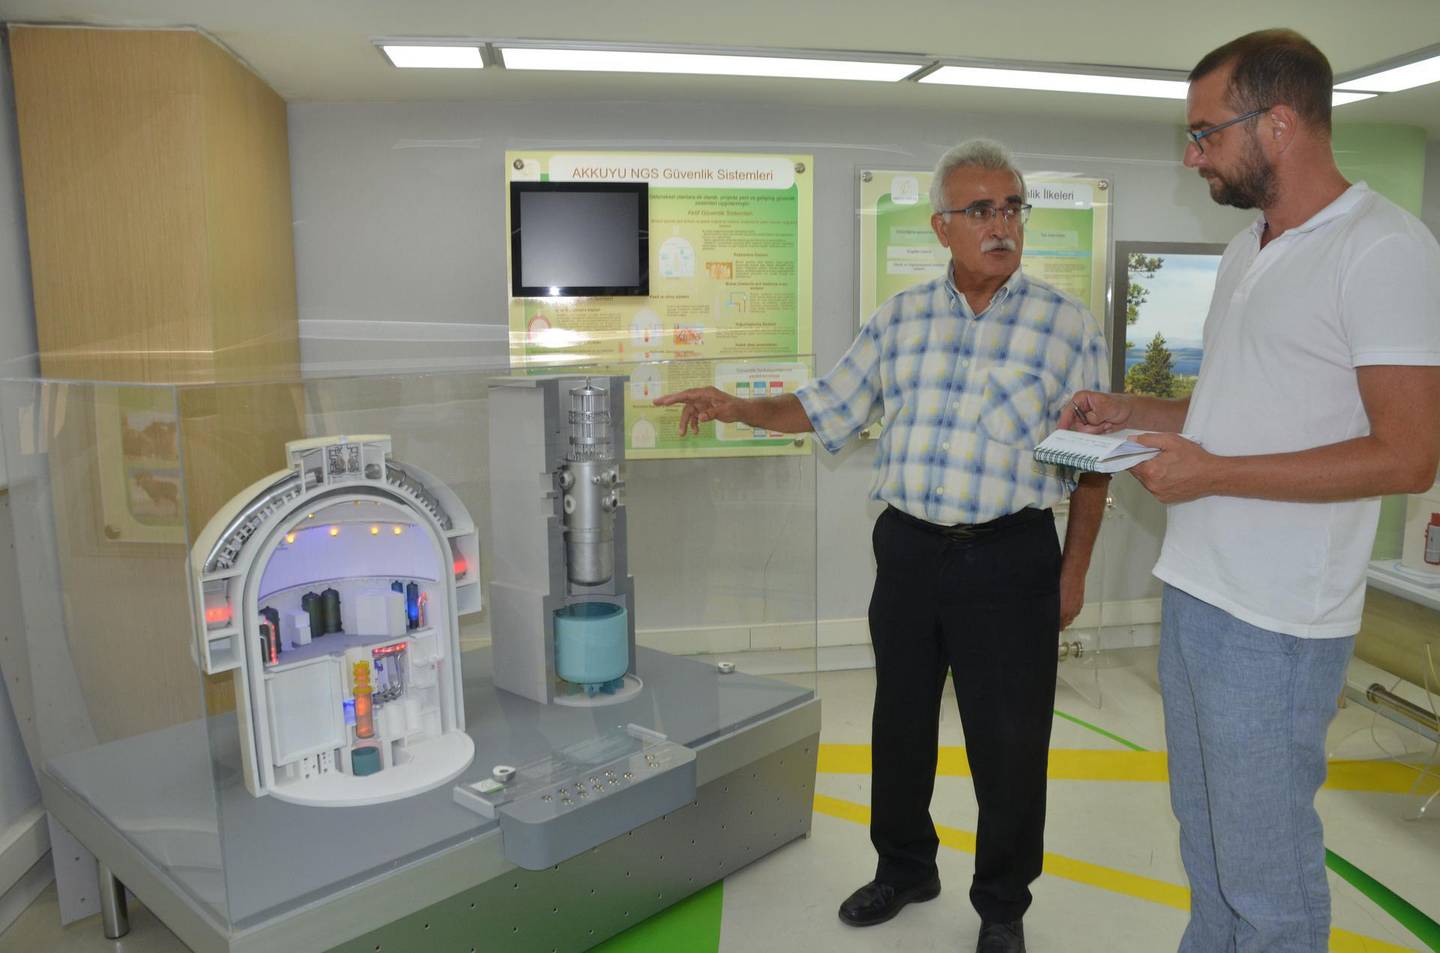 Lutfi Sarici, the manager of Akkuyu's nuclear information centre, shows a model of what the Russian-led project is expected to look like. Necdet Tas for The National